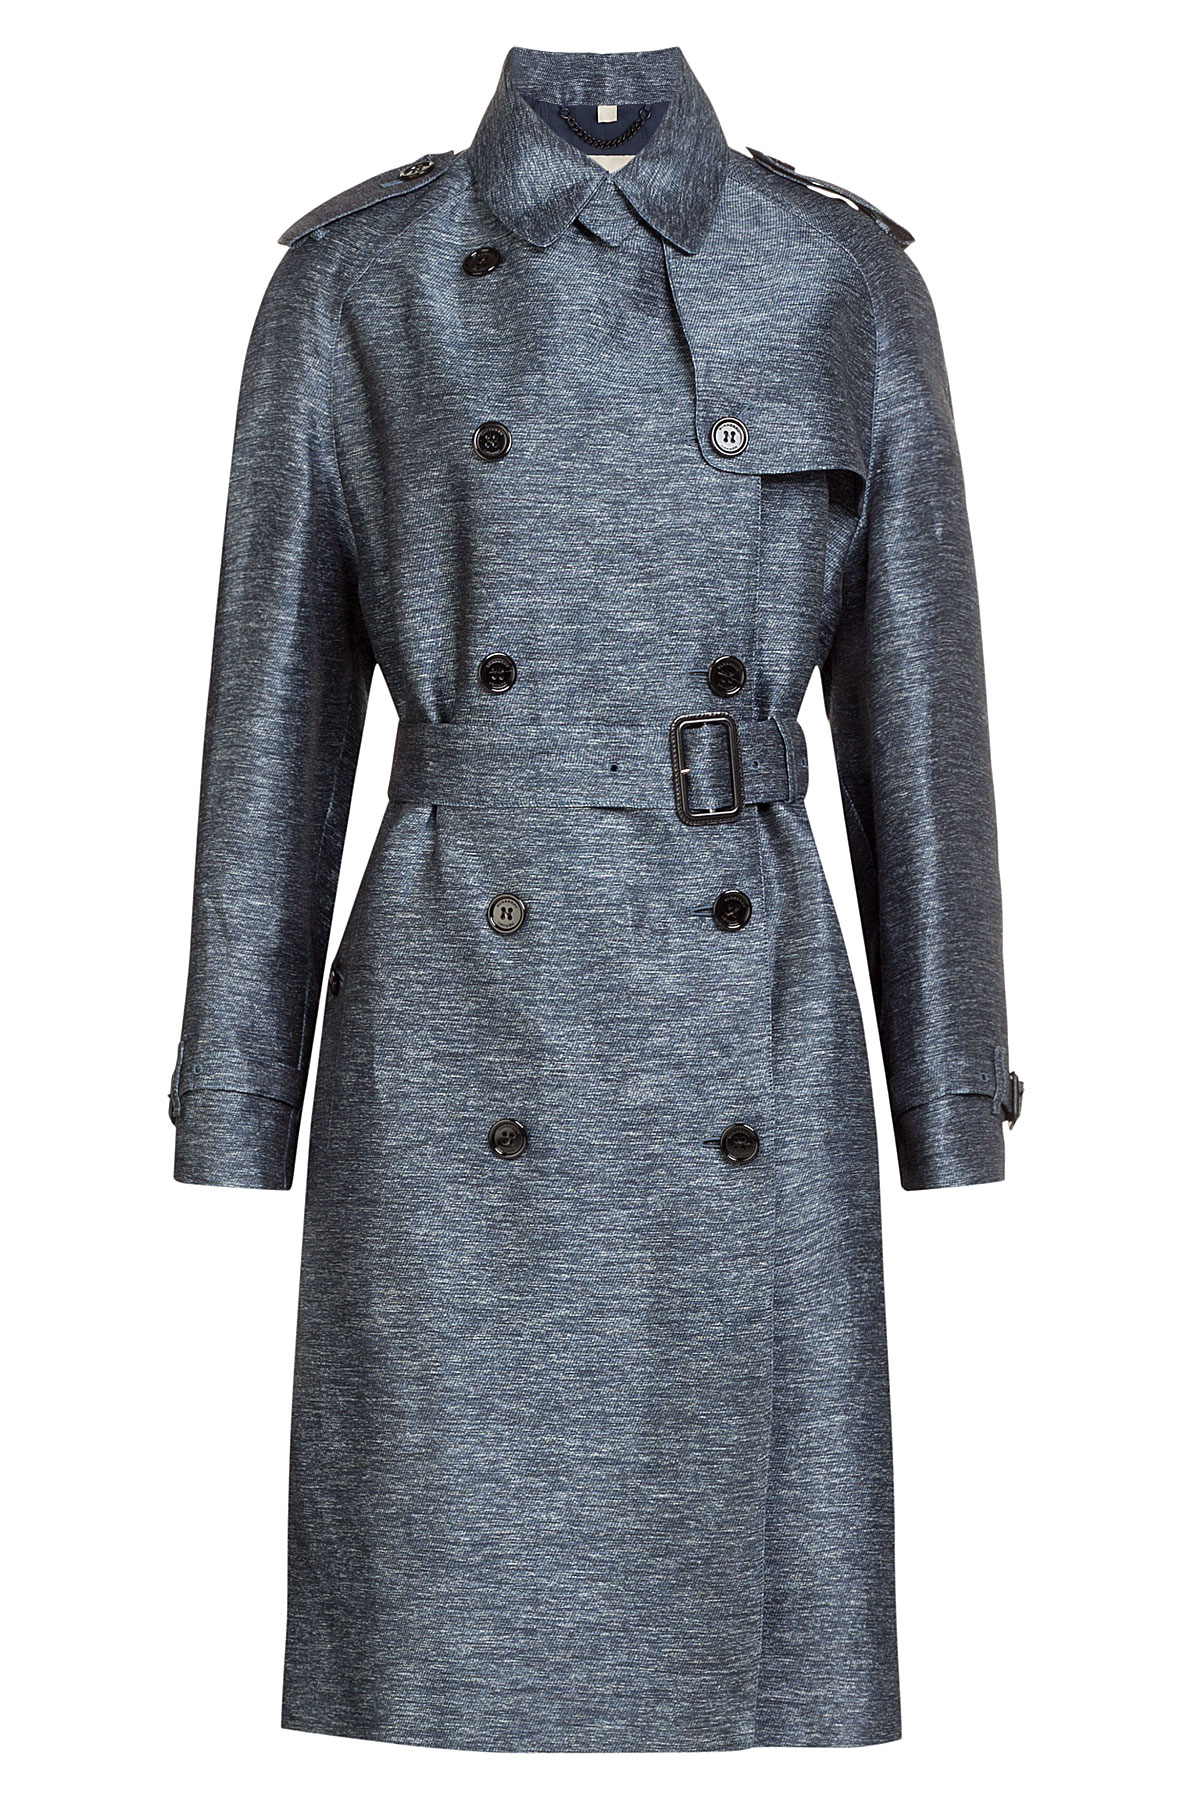 Lyst - Burberry Terringhill Linen-silk Trench Coat - Blue in Blue